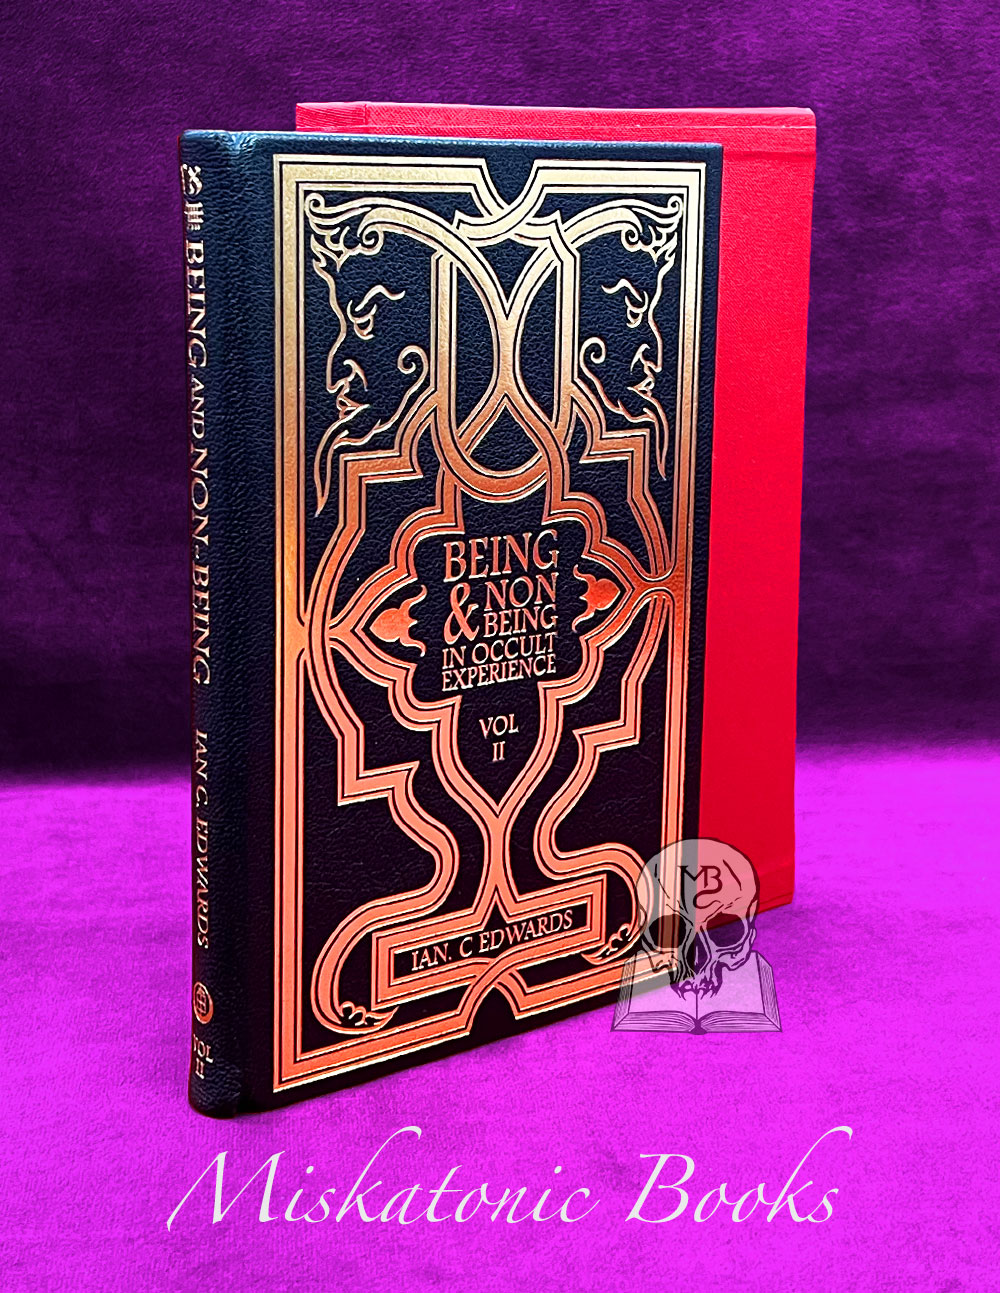 BEING & NON-BEING IN OCCULT EXPERIENCE Volume 2 by Ian C. Edwards - Deluxe Leather Bound Limited Edition in Custom Slipcase